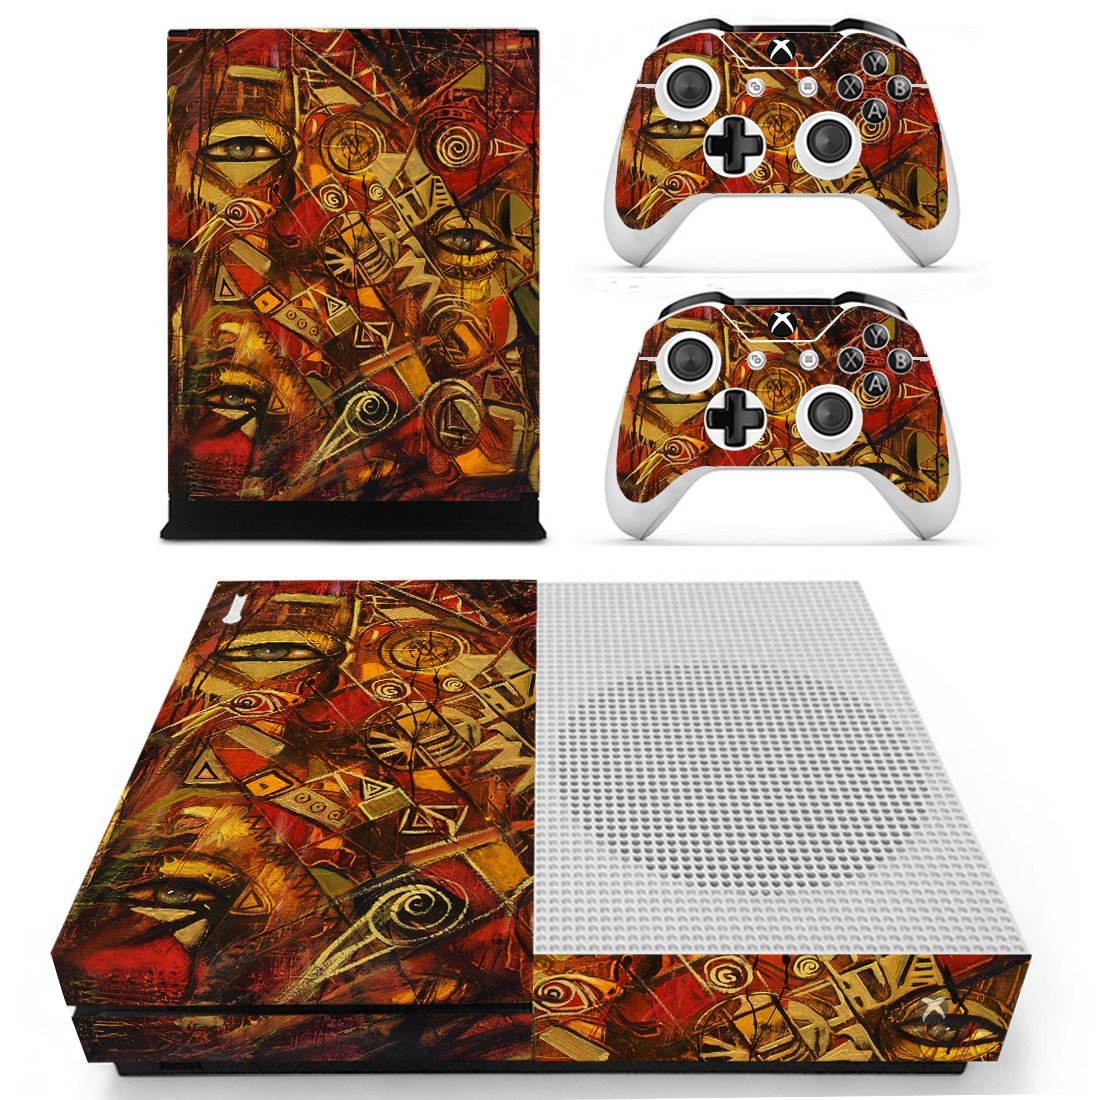 Renacer Cover For Xbox One S